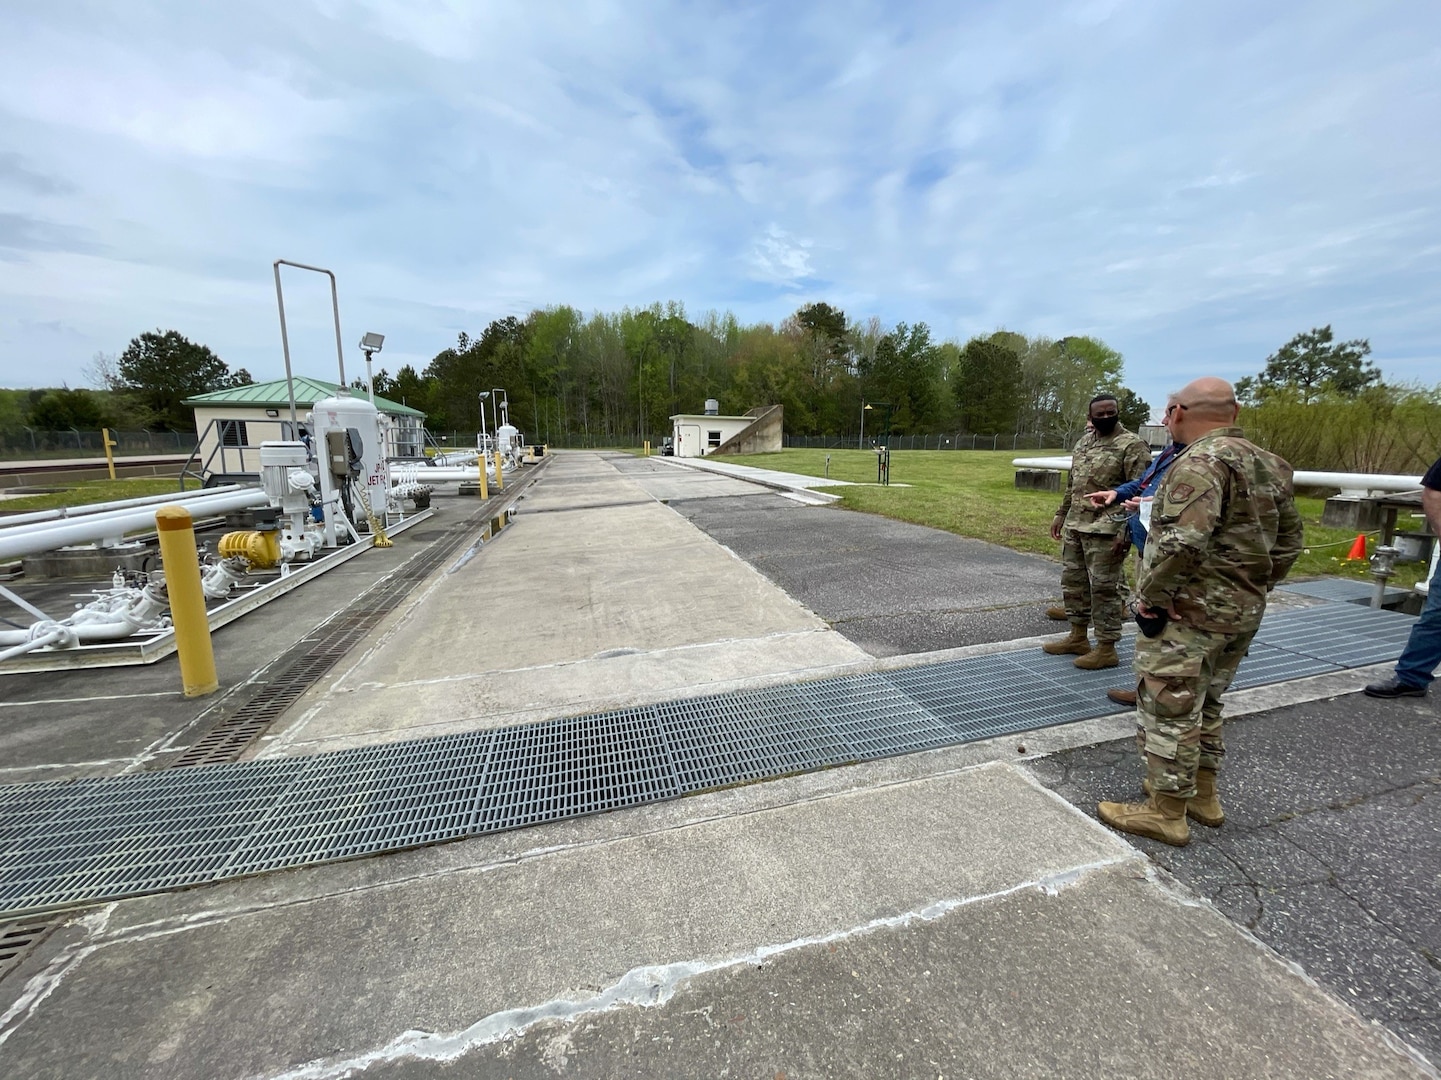 two people in military uniforms and one in civilian attire look at a truck fuel facility